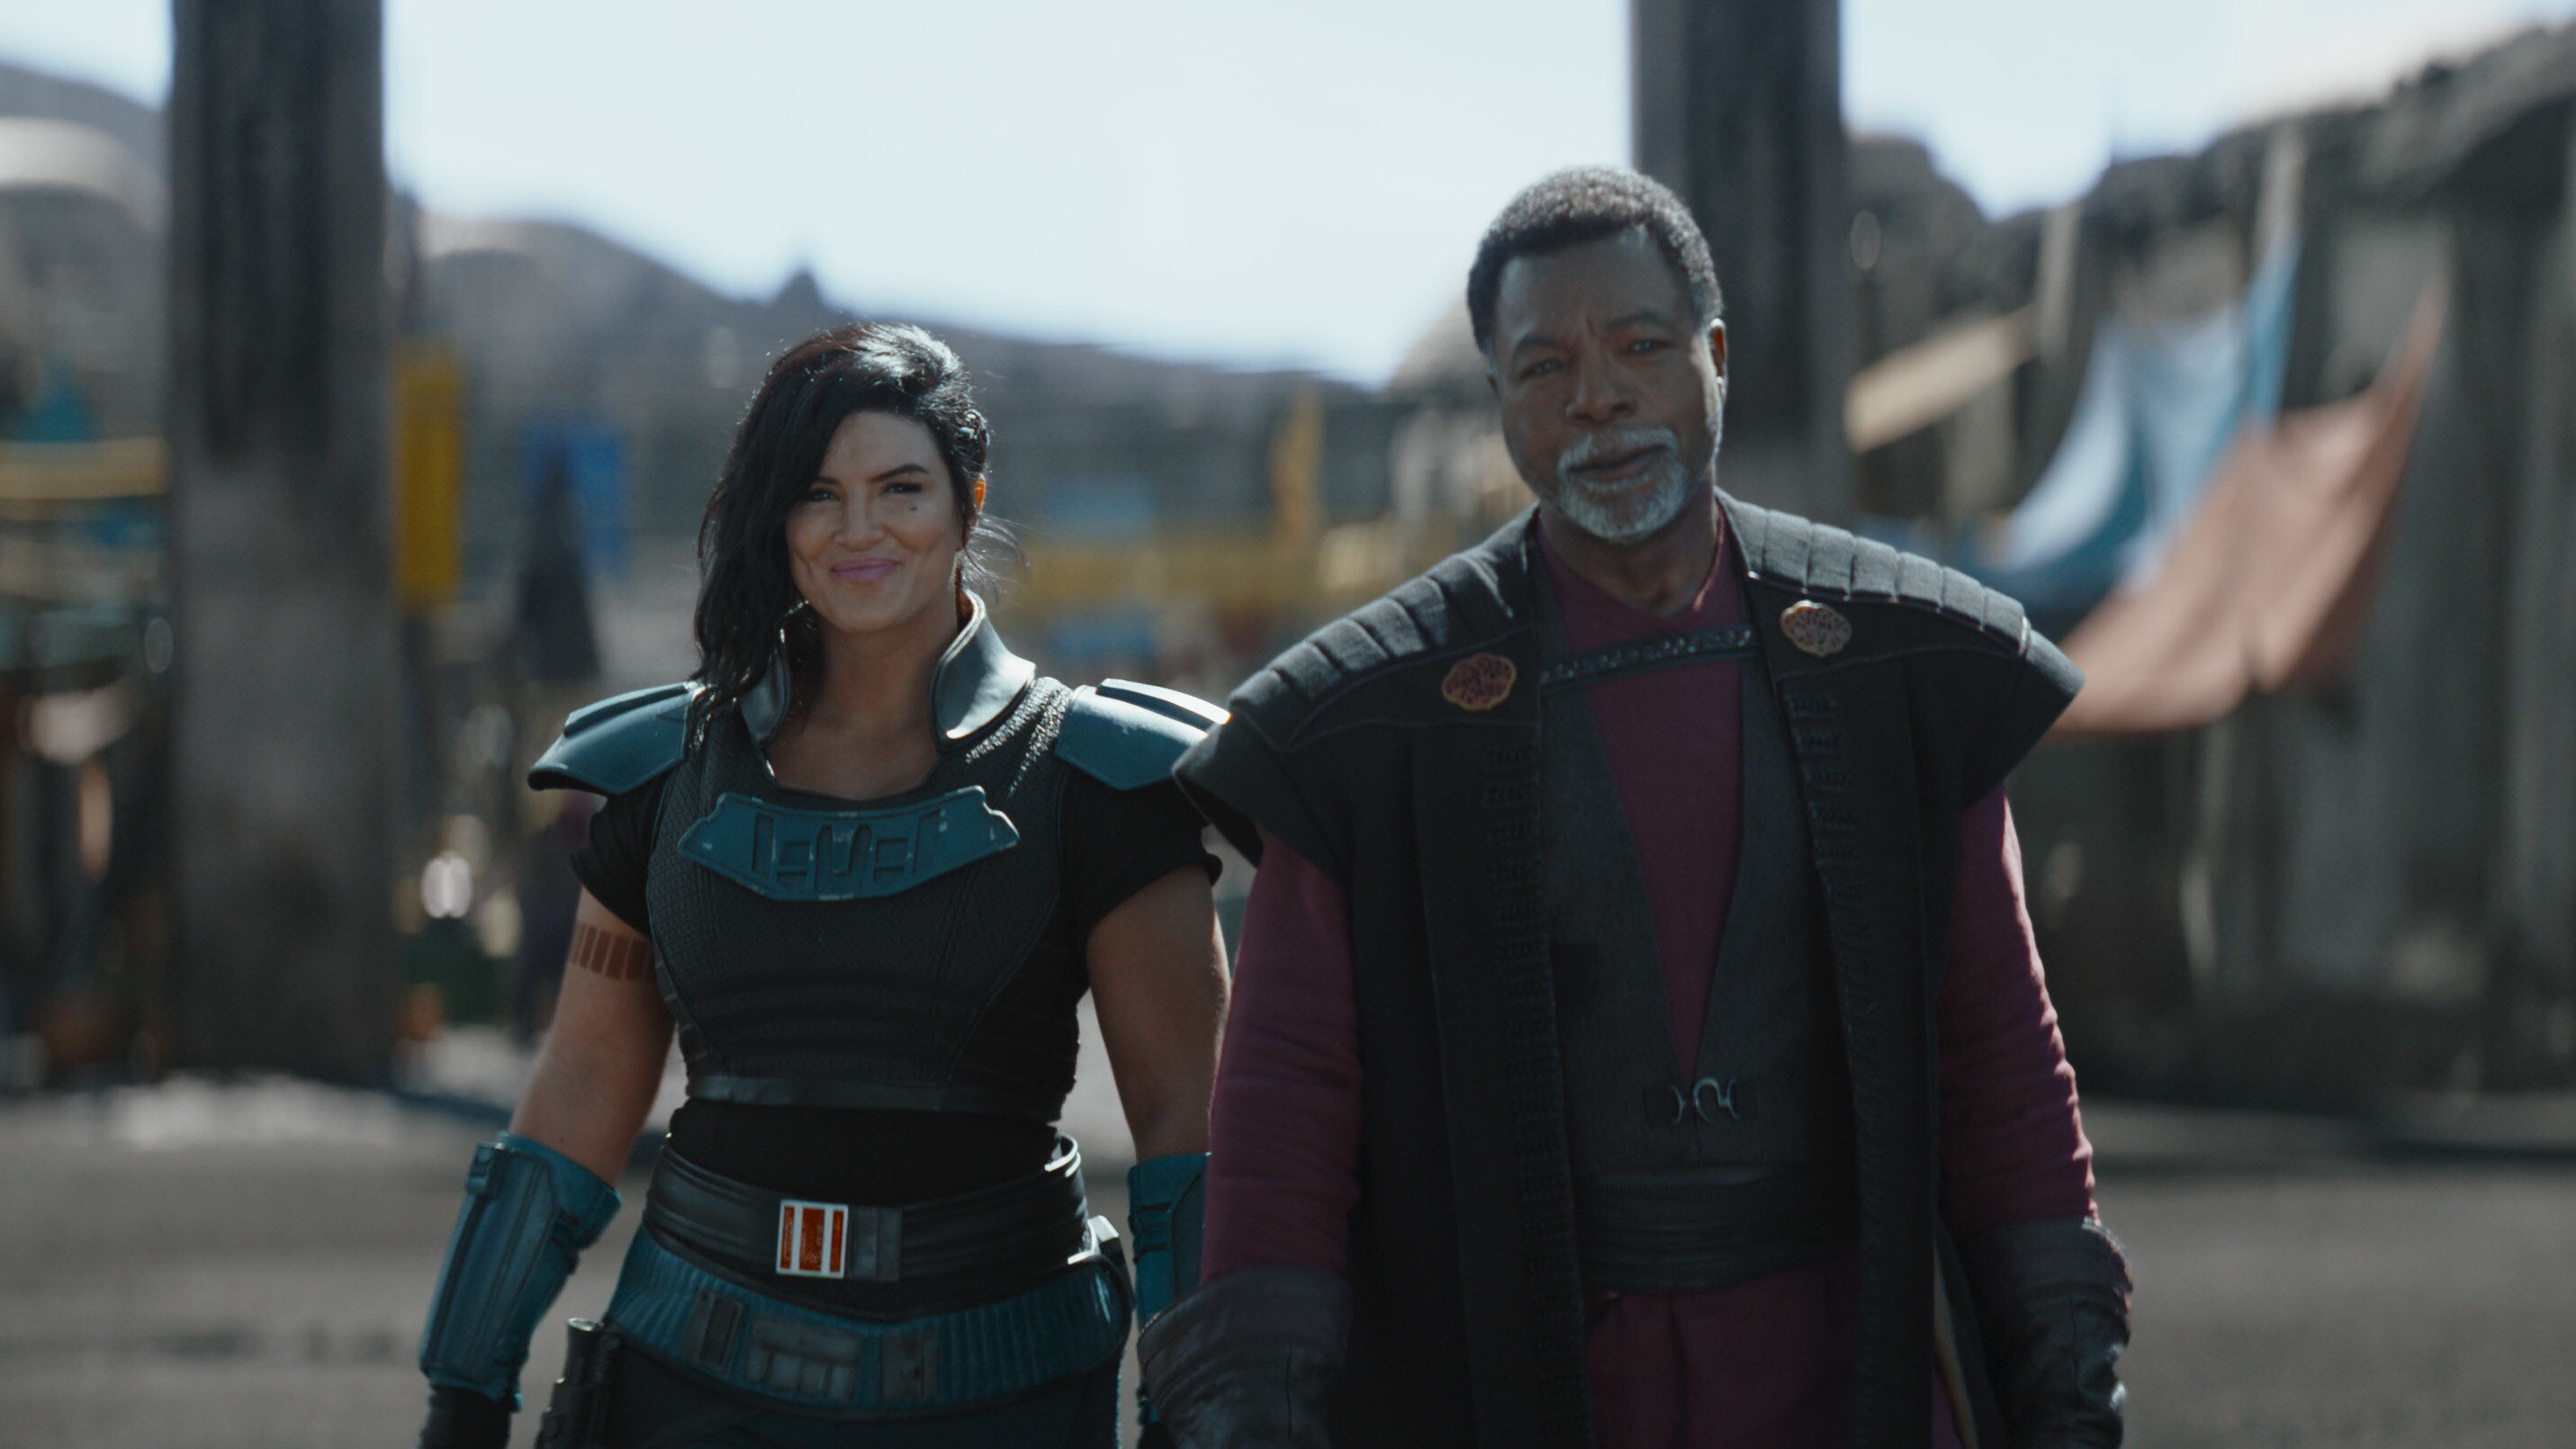 Gina Carano is Cara Dune and Carl Weathers is Greef Karga in Lucasfilm's THE MANDALORIAN, season two, exclusively on Disney+. © 2020 Lucasfilm Ltd. & ™. All Rights Reserved.